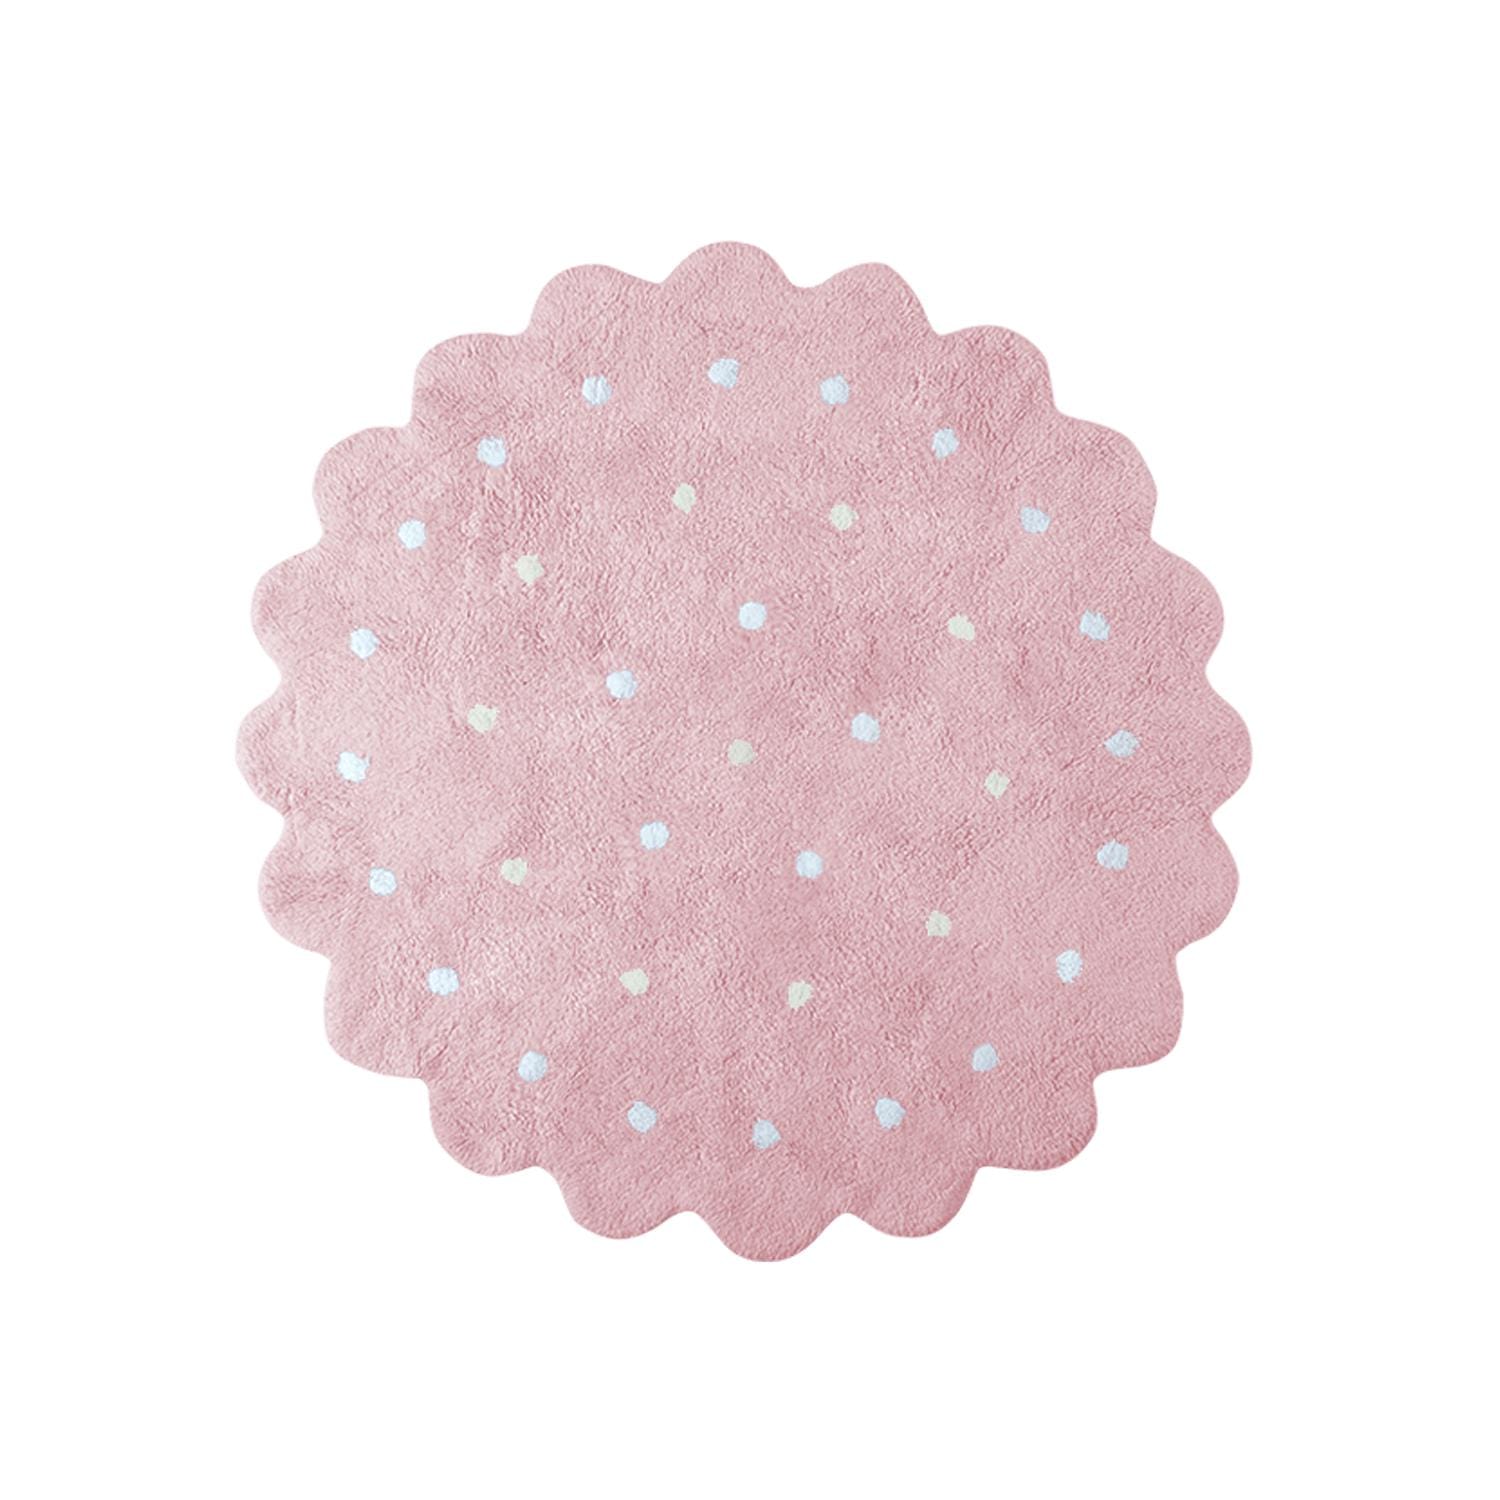 Rugs by Roo | Lorena Canals Little Biscuit Pink Machine Washable Area Rug-C-13301